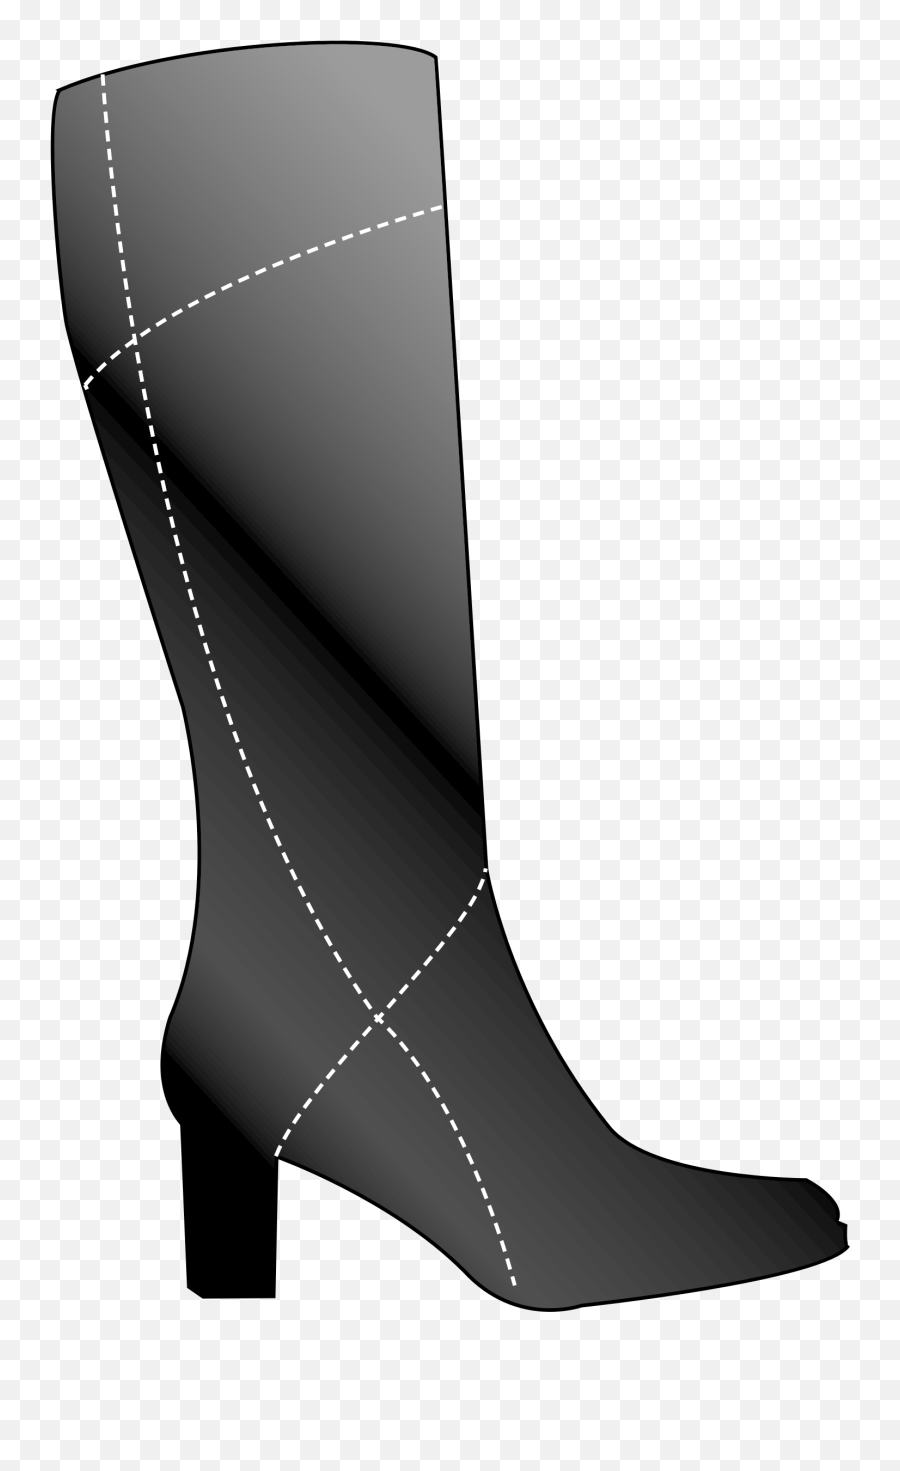 Boots Clipart High Boot Boots High - Boots For Women Clipart Emoji,Boots Clipart